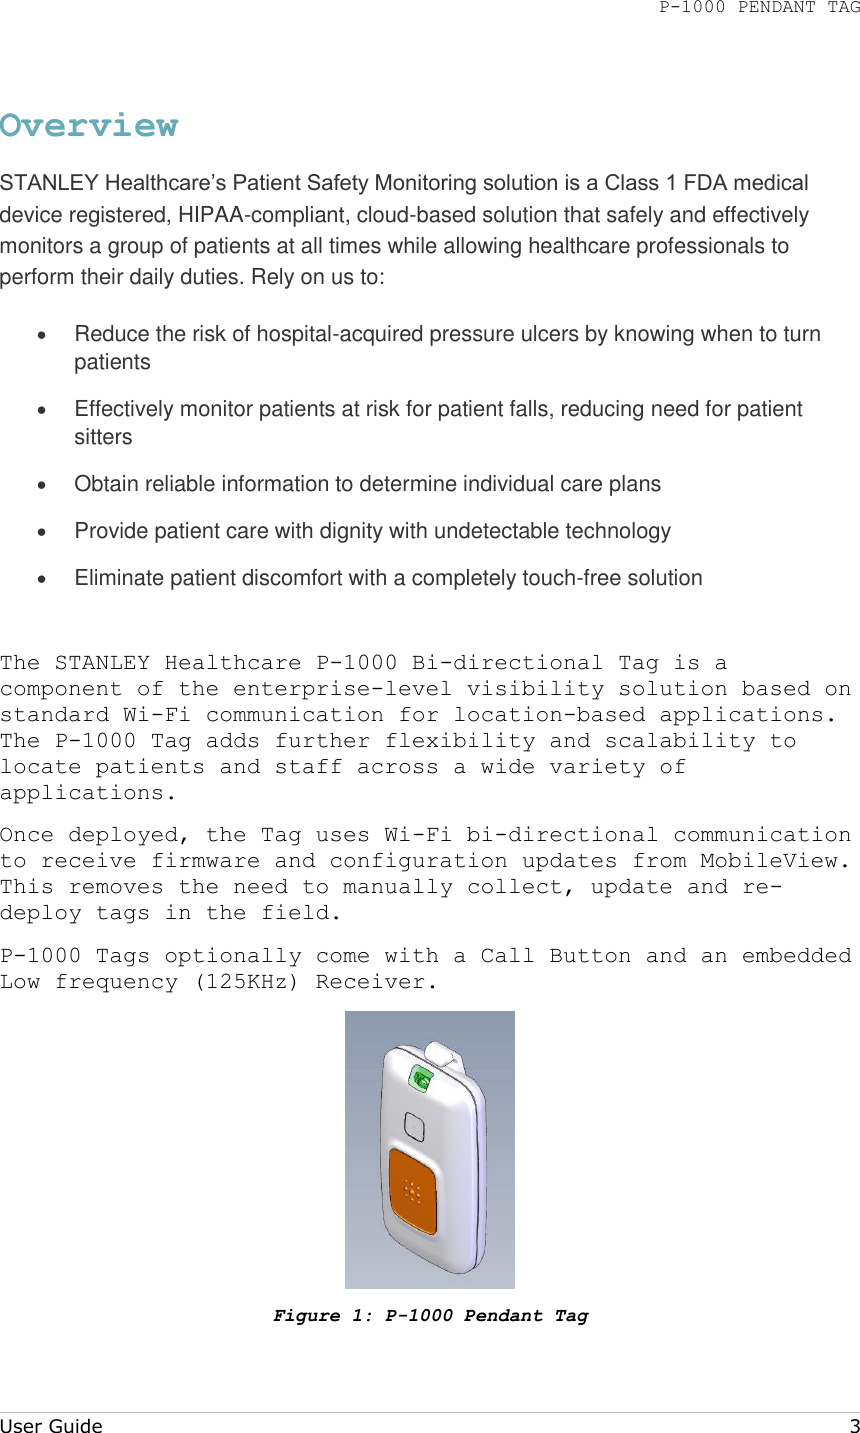 P-1000 PENDANT TAG  User Guide     3 Overview STANLEY Healthcare’s Patient Safety Monitoring solution is a Class 1 FDA medical device registered, HIPAA-compliant, cloud-based solution that safely and effectively monitors a group of patients at all times while allowing healthcare professionals to perform their daily duties. Rely on us to:  Reduce the risk of hospital-acquired pressure ulcers by knowing when to turn patients  Effectively monitor patients at risk for patient falls, reducing need for patient sitters  Obtain reliable information to determine individual care plans  Provide patient care with dignity with undetectable technology  Eliminate patient discomfort with a completely touch-free solution  The STANLEY Healthcare P-1000 Bi-directional Tag is a component of the enterprise-level visibility solution based on standard Wi-Fi communication for location-based applications. The P-1000 Tag adds further flexibility and scalability to locate patients and staff across a wide variety of applications. Once deployed, the Tag uses Wi-Fi bi-directional communication to receive firmware and configuration updates from MobileView. This removes the need to manually collect, update and re-deploy tags in the field. P-1000 Tags optionally come with a Call Button and an embedded Low frequency (125KHz) Receiver.  Figure 1: P-1000 Pendant Tag 